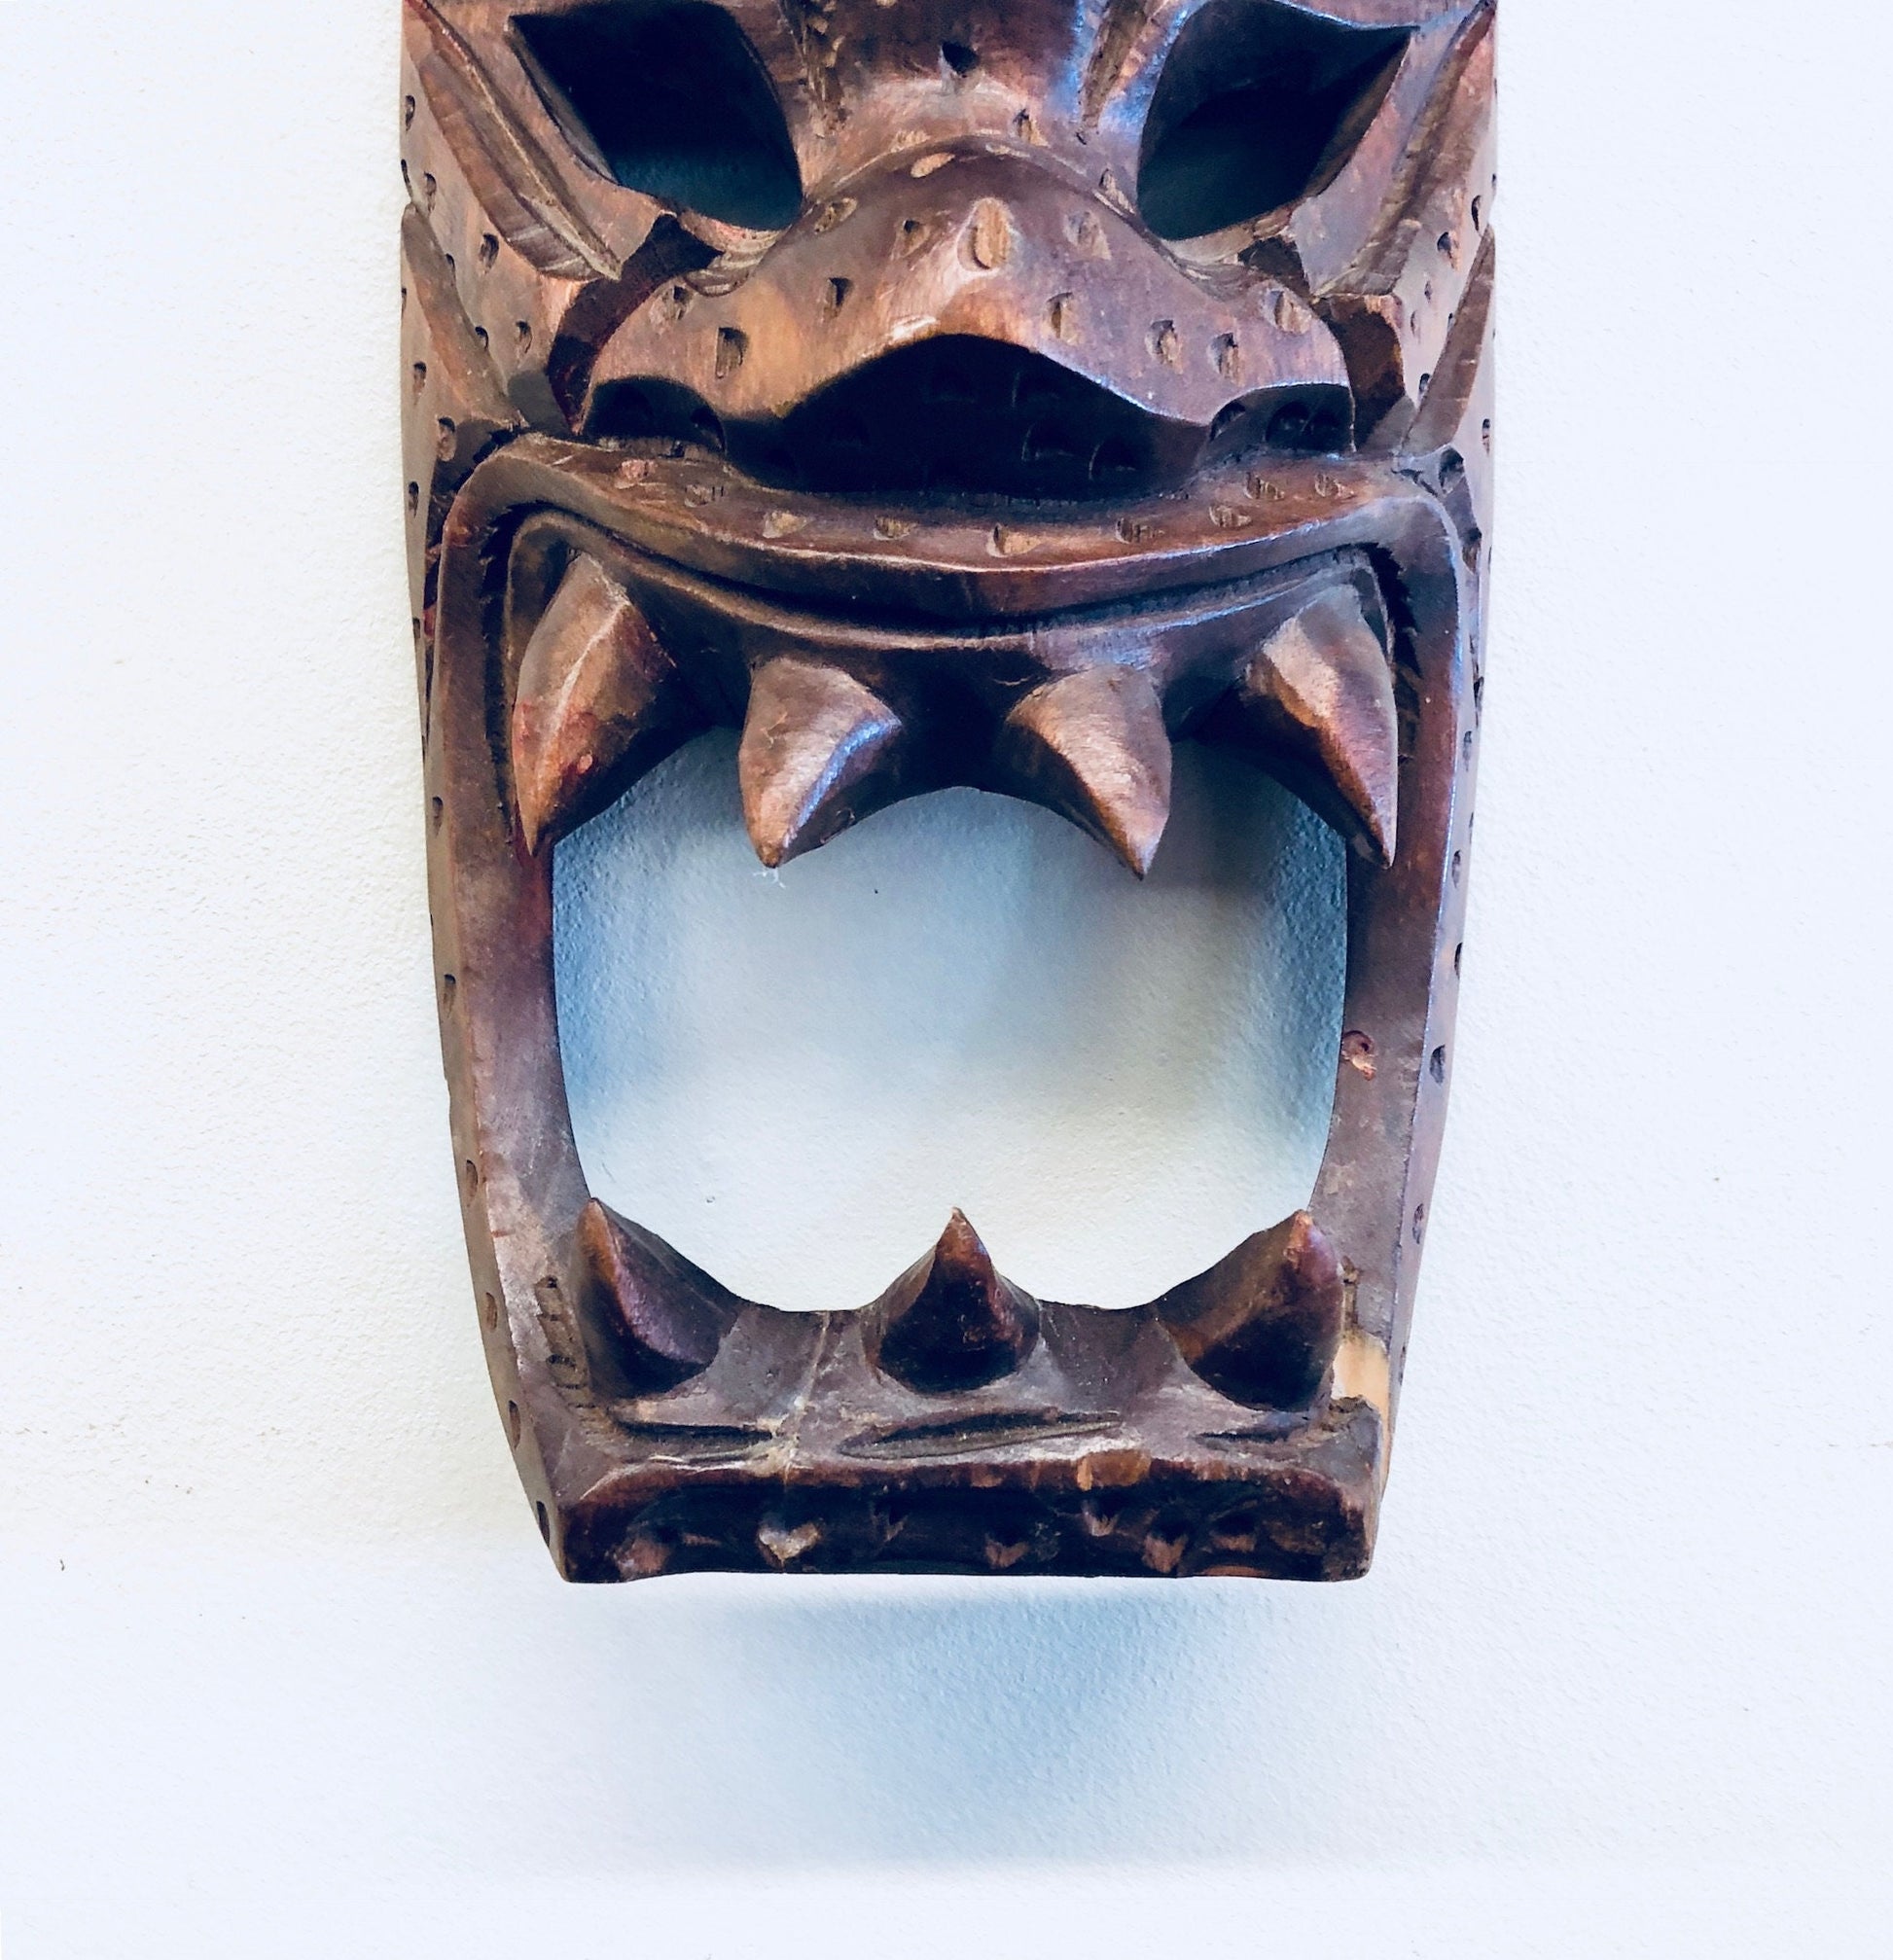 Vintage hand carved wooden mask with exaggerated features and teeth, in brown tones, suitable for primitive wall decor or display.